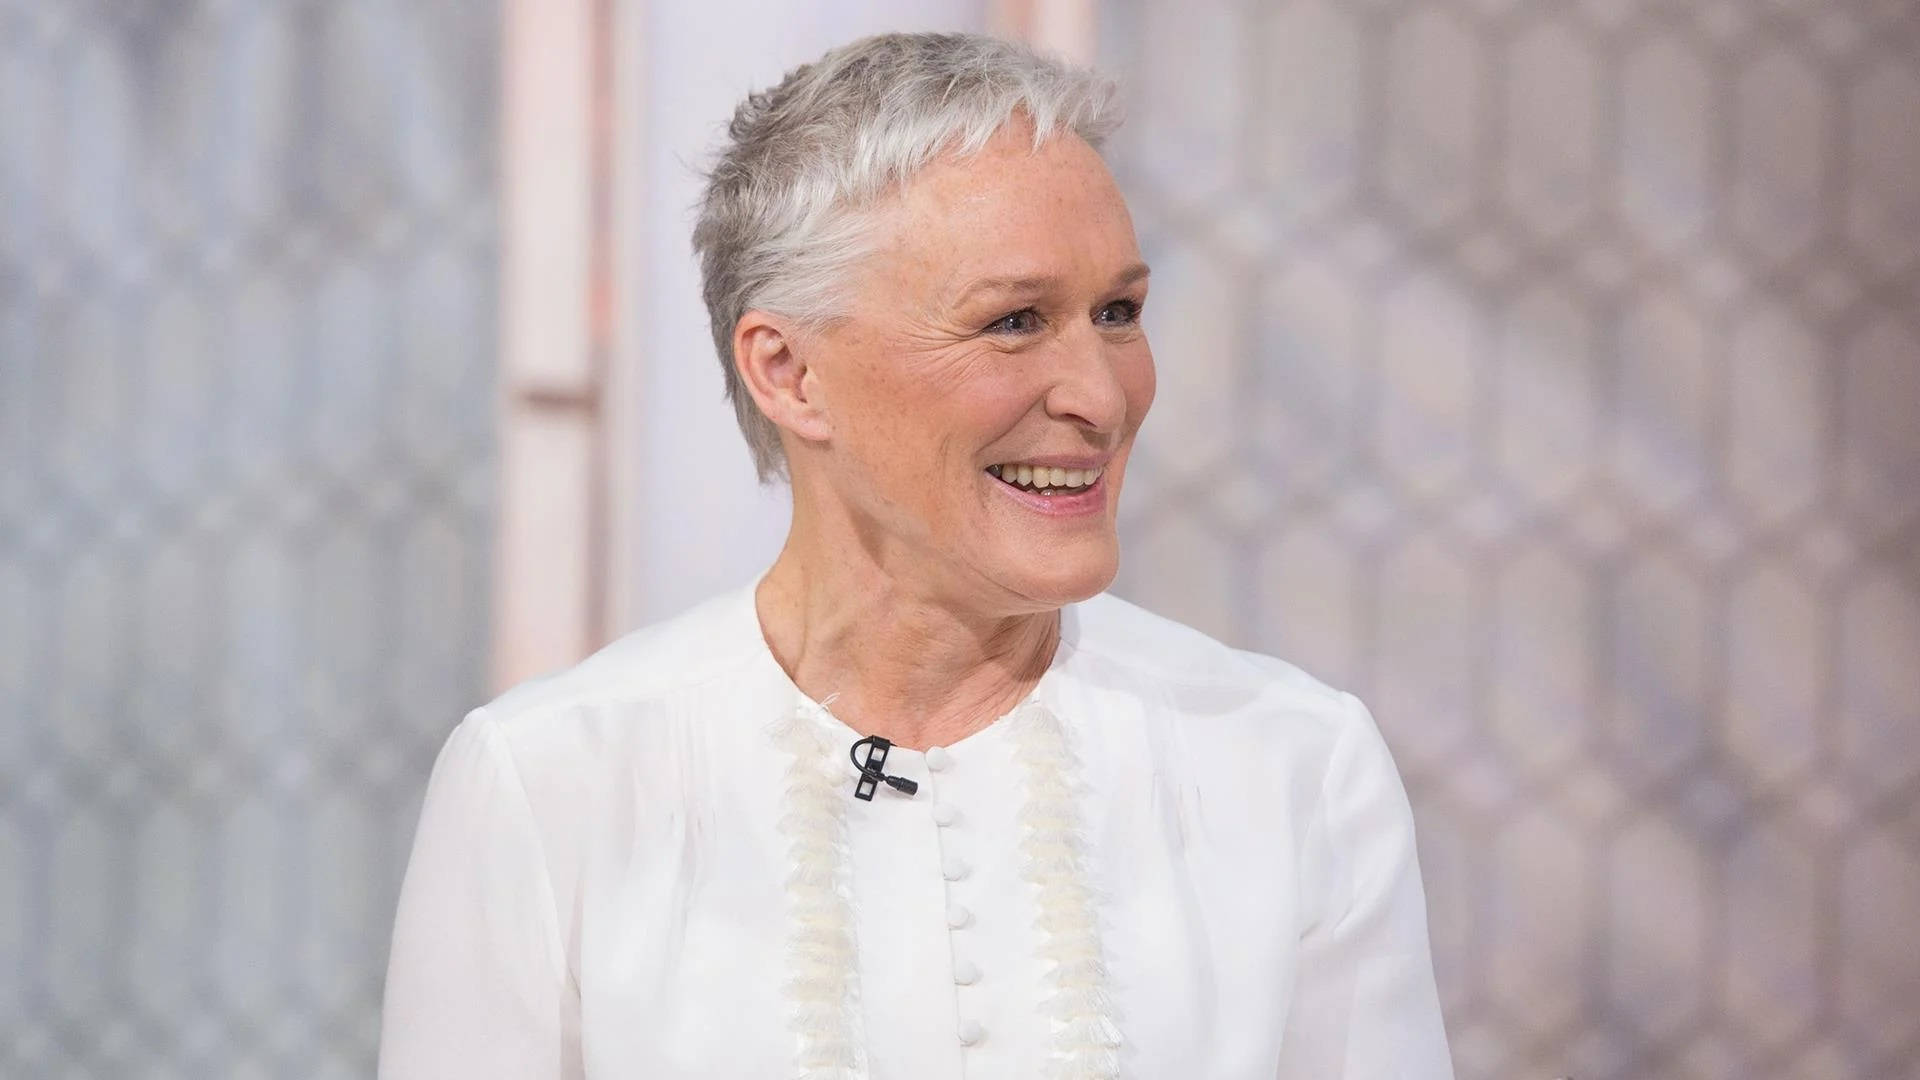 Glenn Close during an appearance on The Today Show Wallpaper